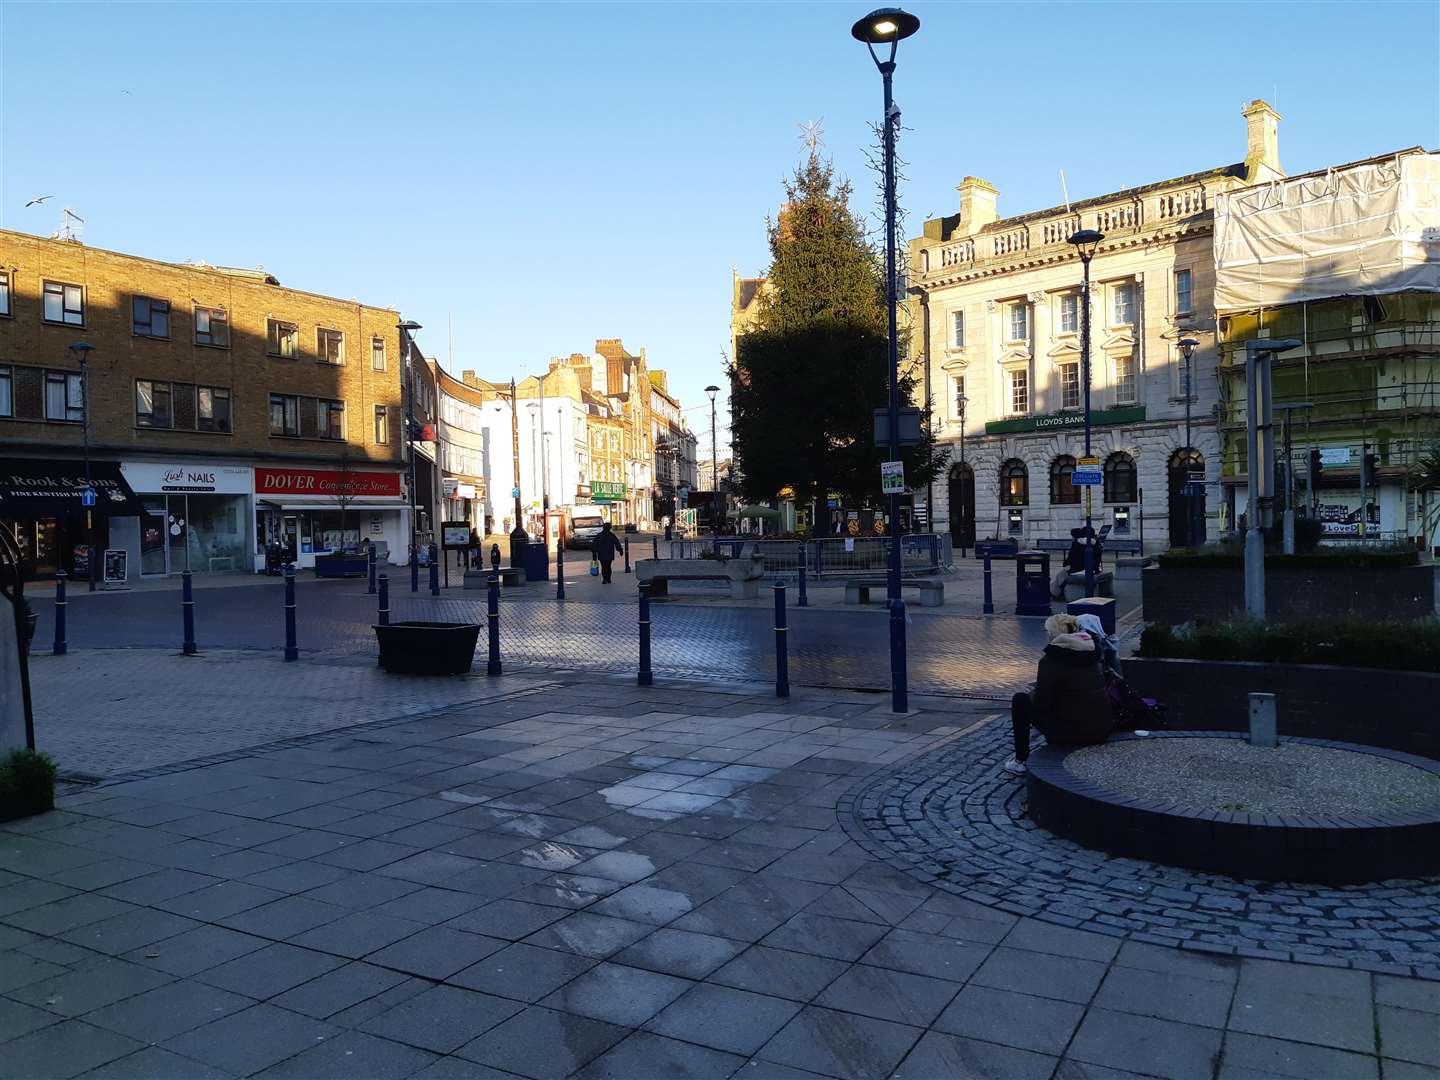 Market Square, at the heart of Dover town centre